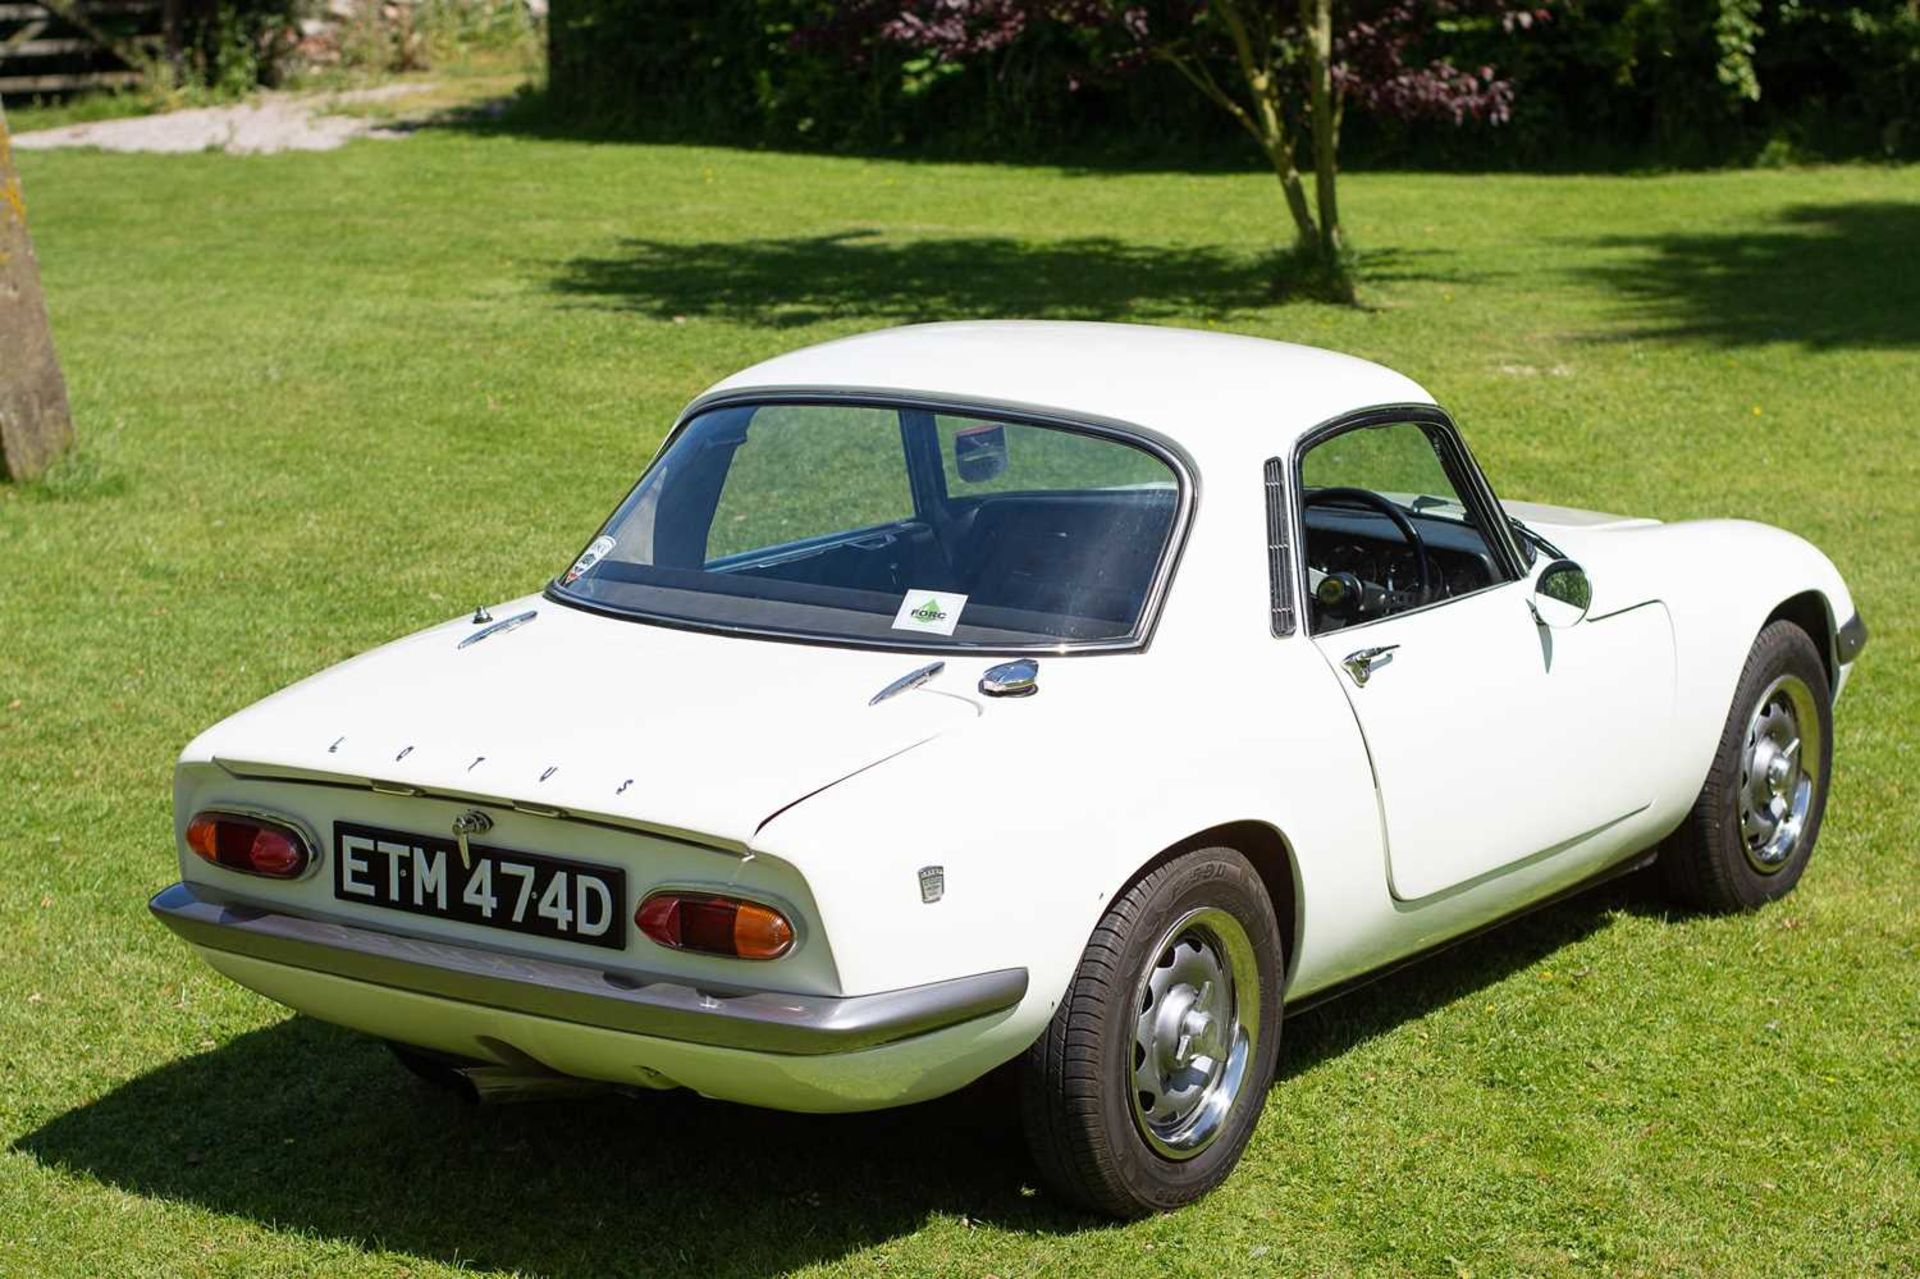 1966 Lotus Elan Fixed Head Coupe Sympathetically restored, equipped with desirable upgrades - Image 11 of 100